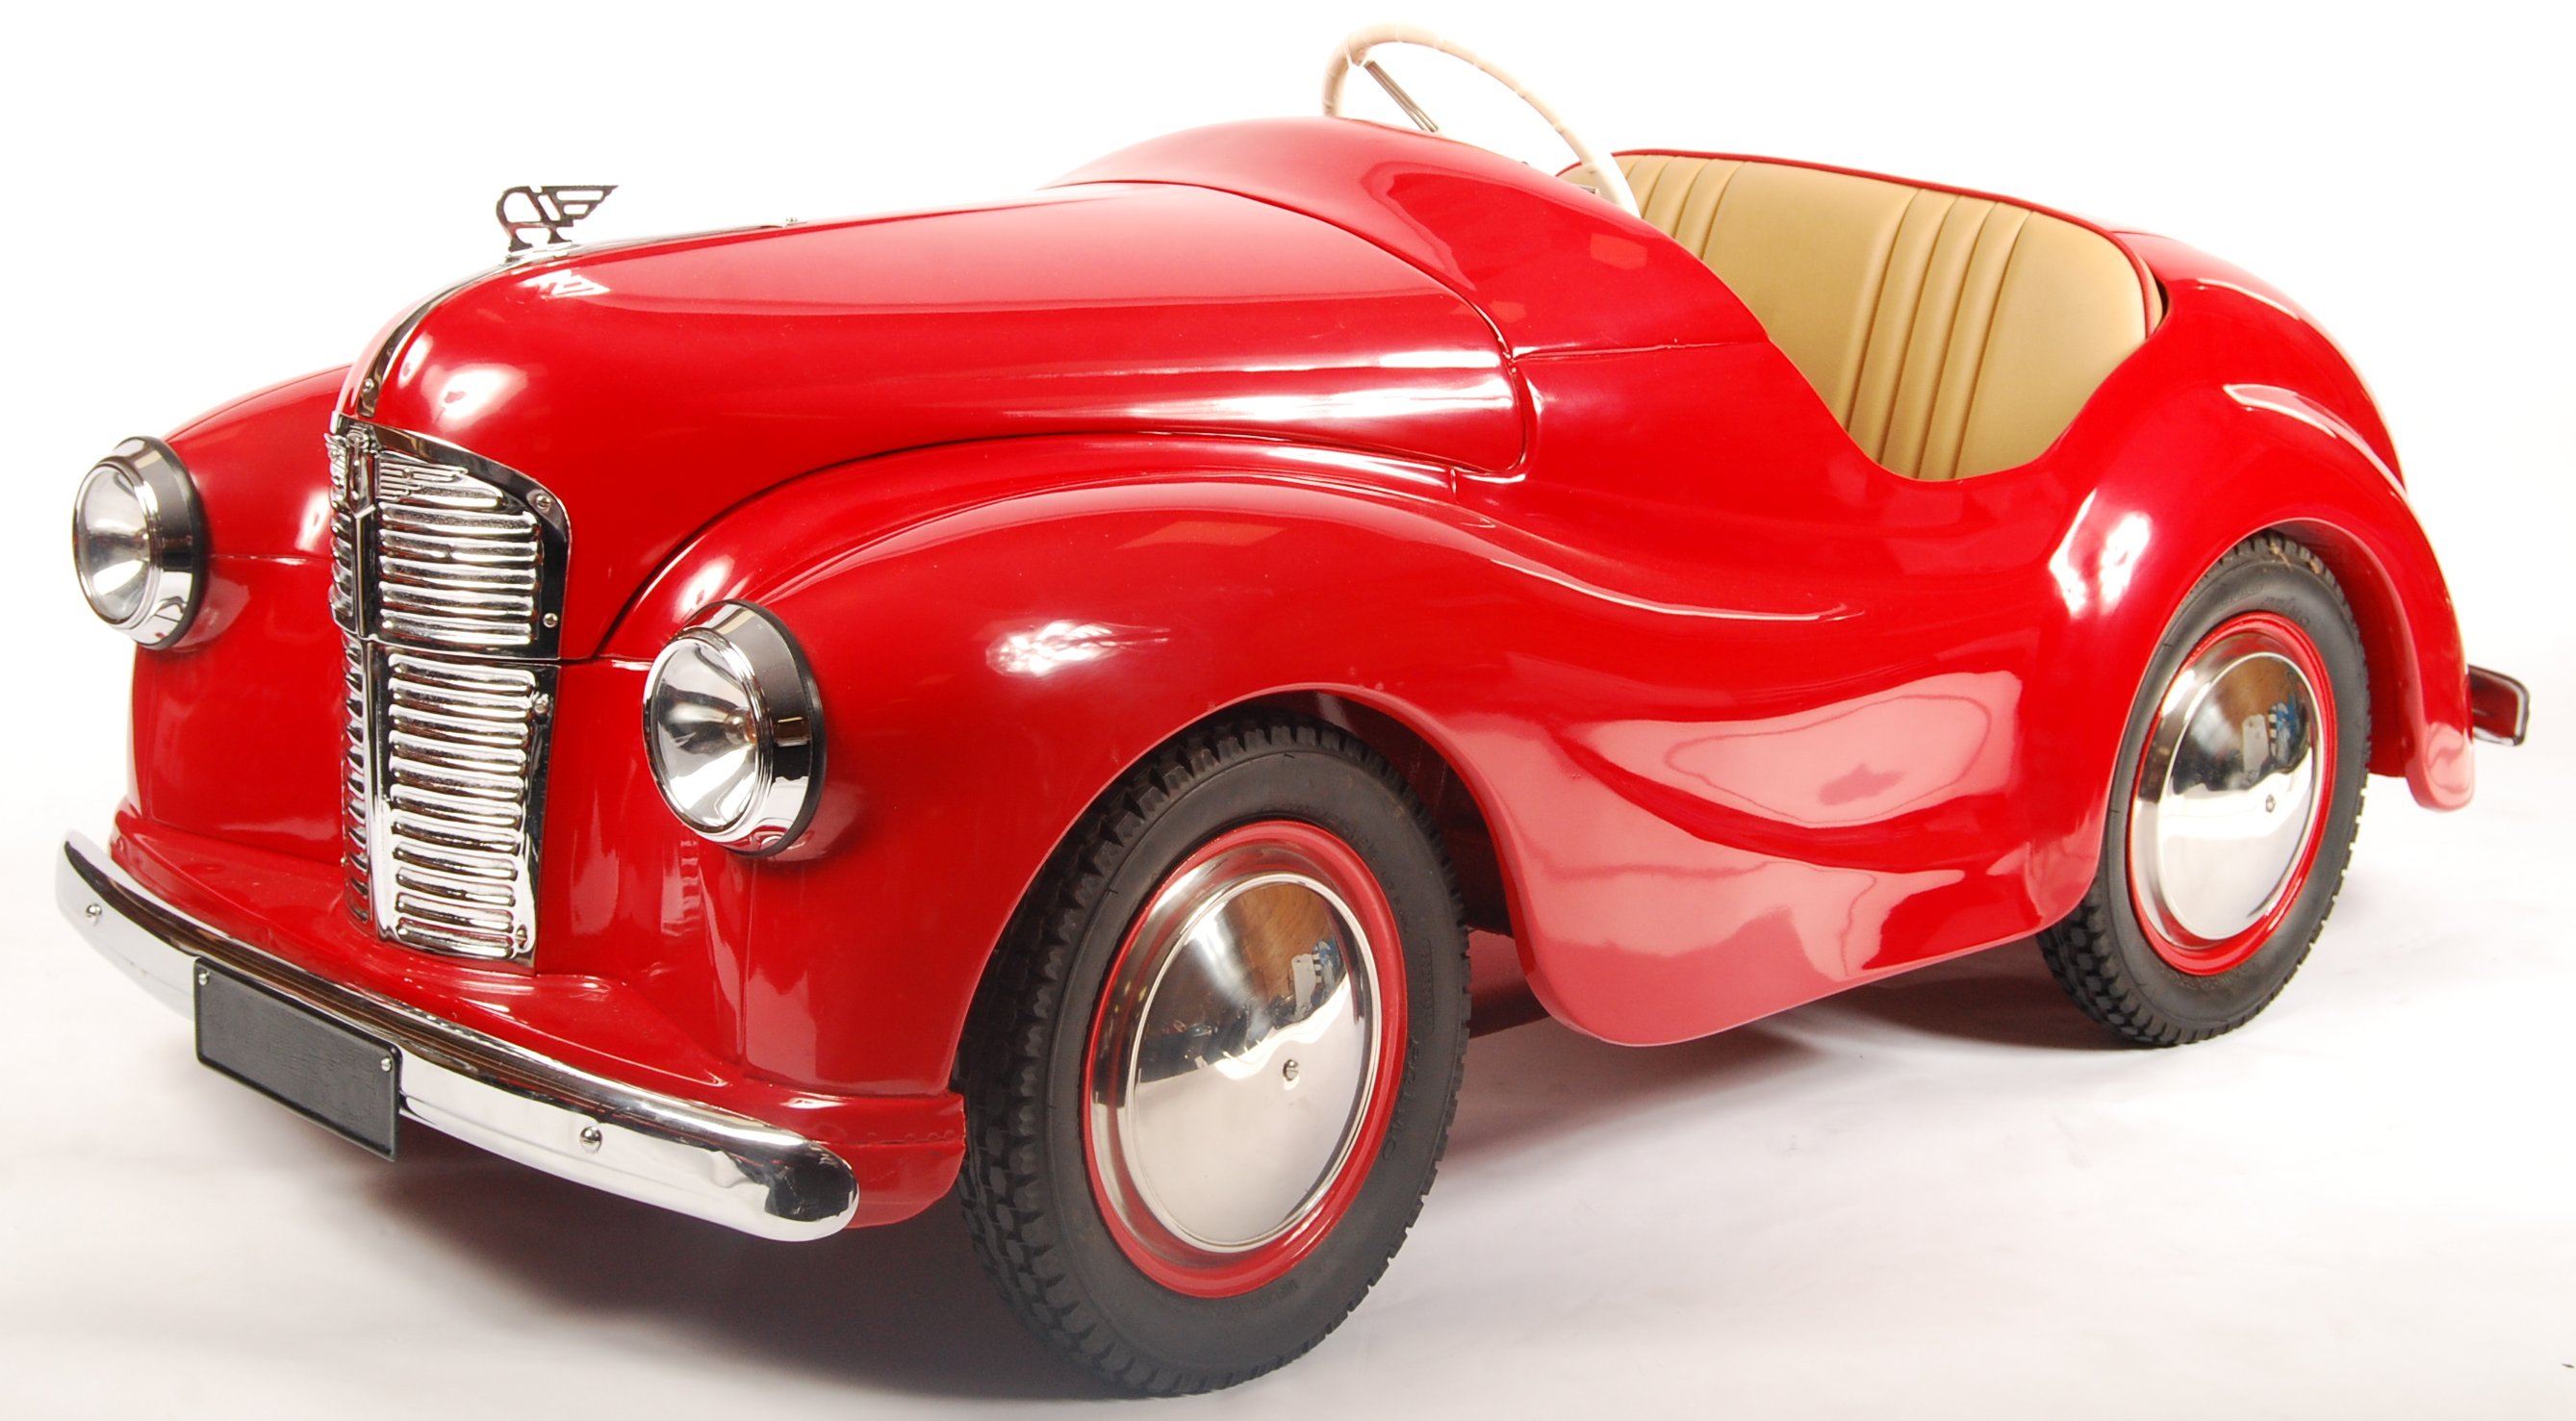 CHARMING RARE 1940'S AUSTIN J40 PEDAL CAR IN RED